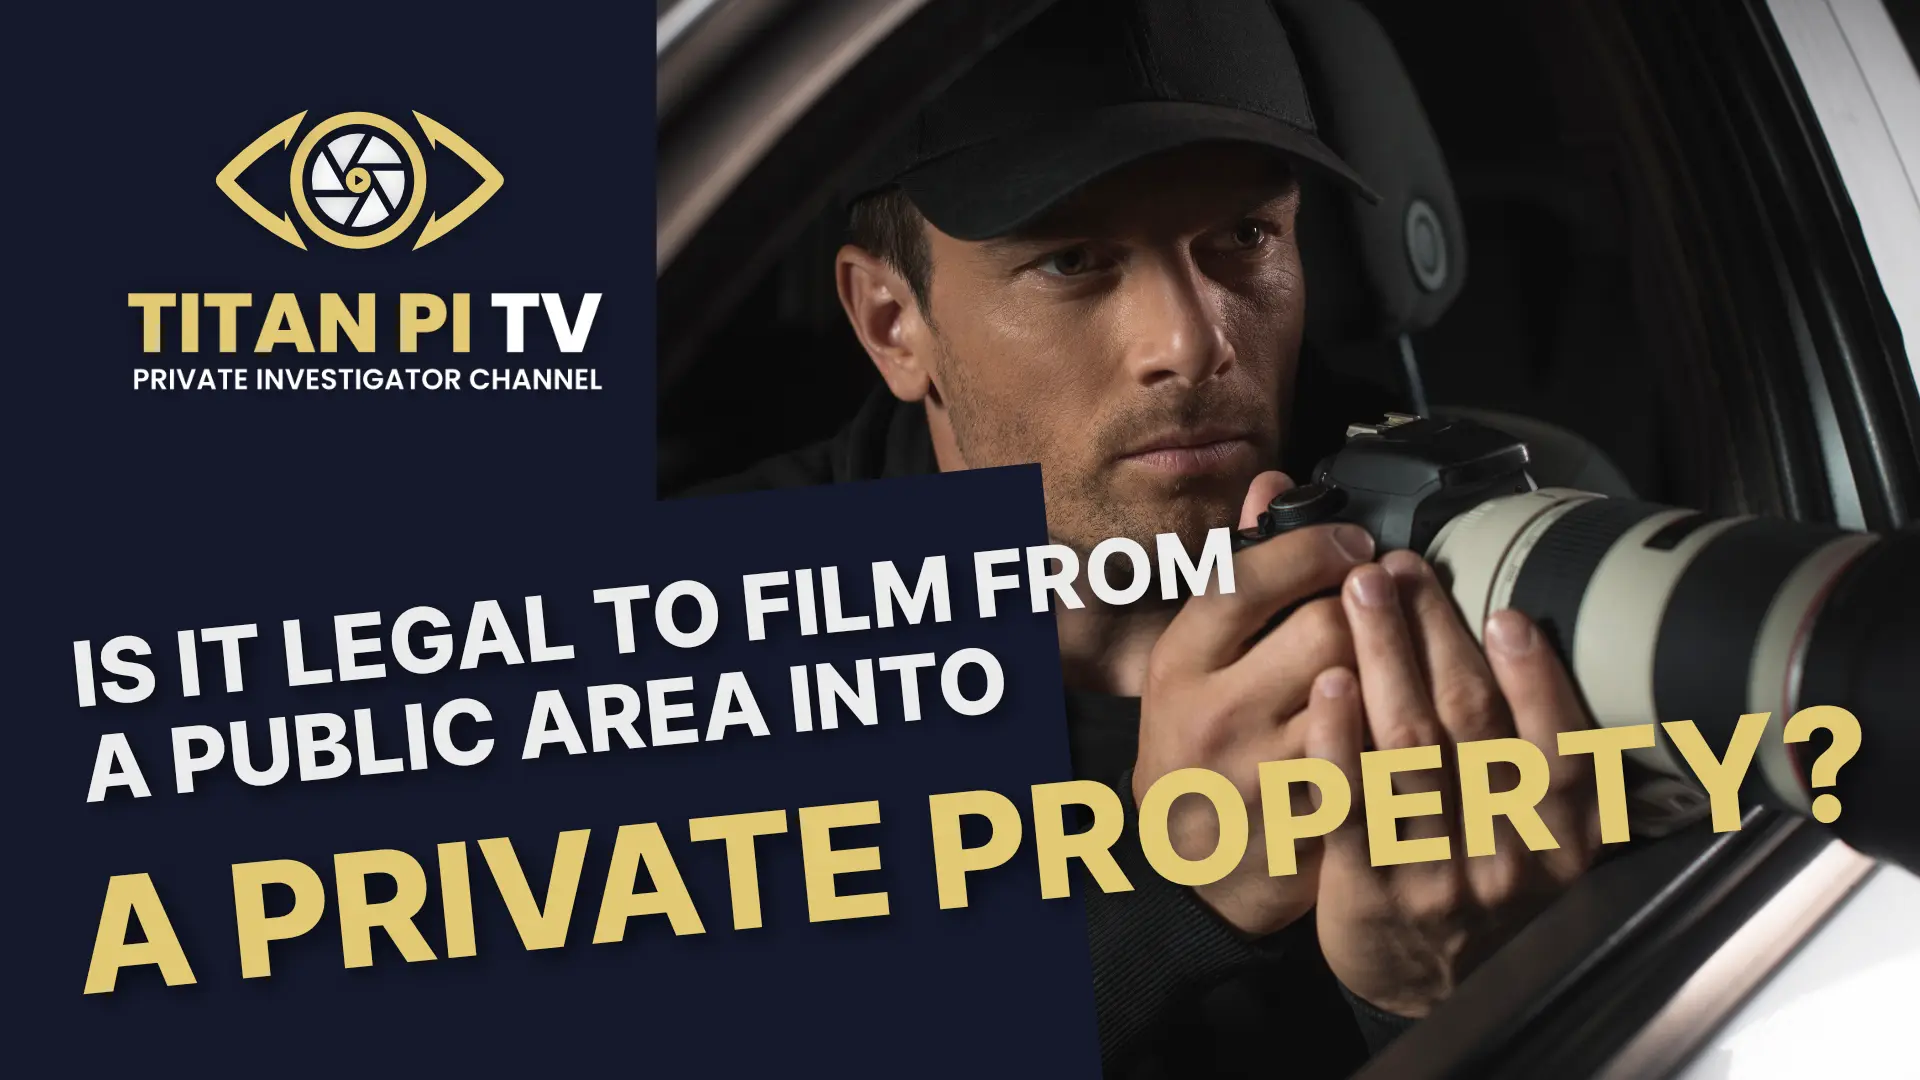 Is it legal for a surveillance operative to film from a public area into a private property? | Titan PI TV